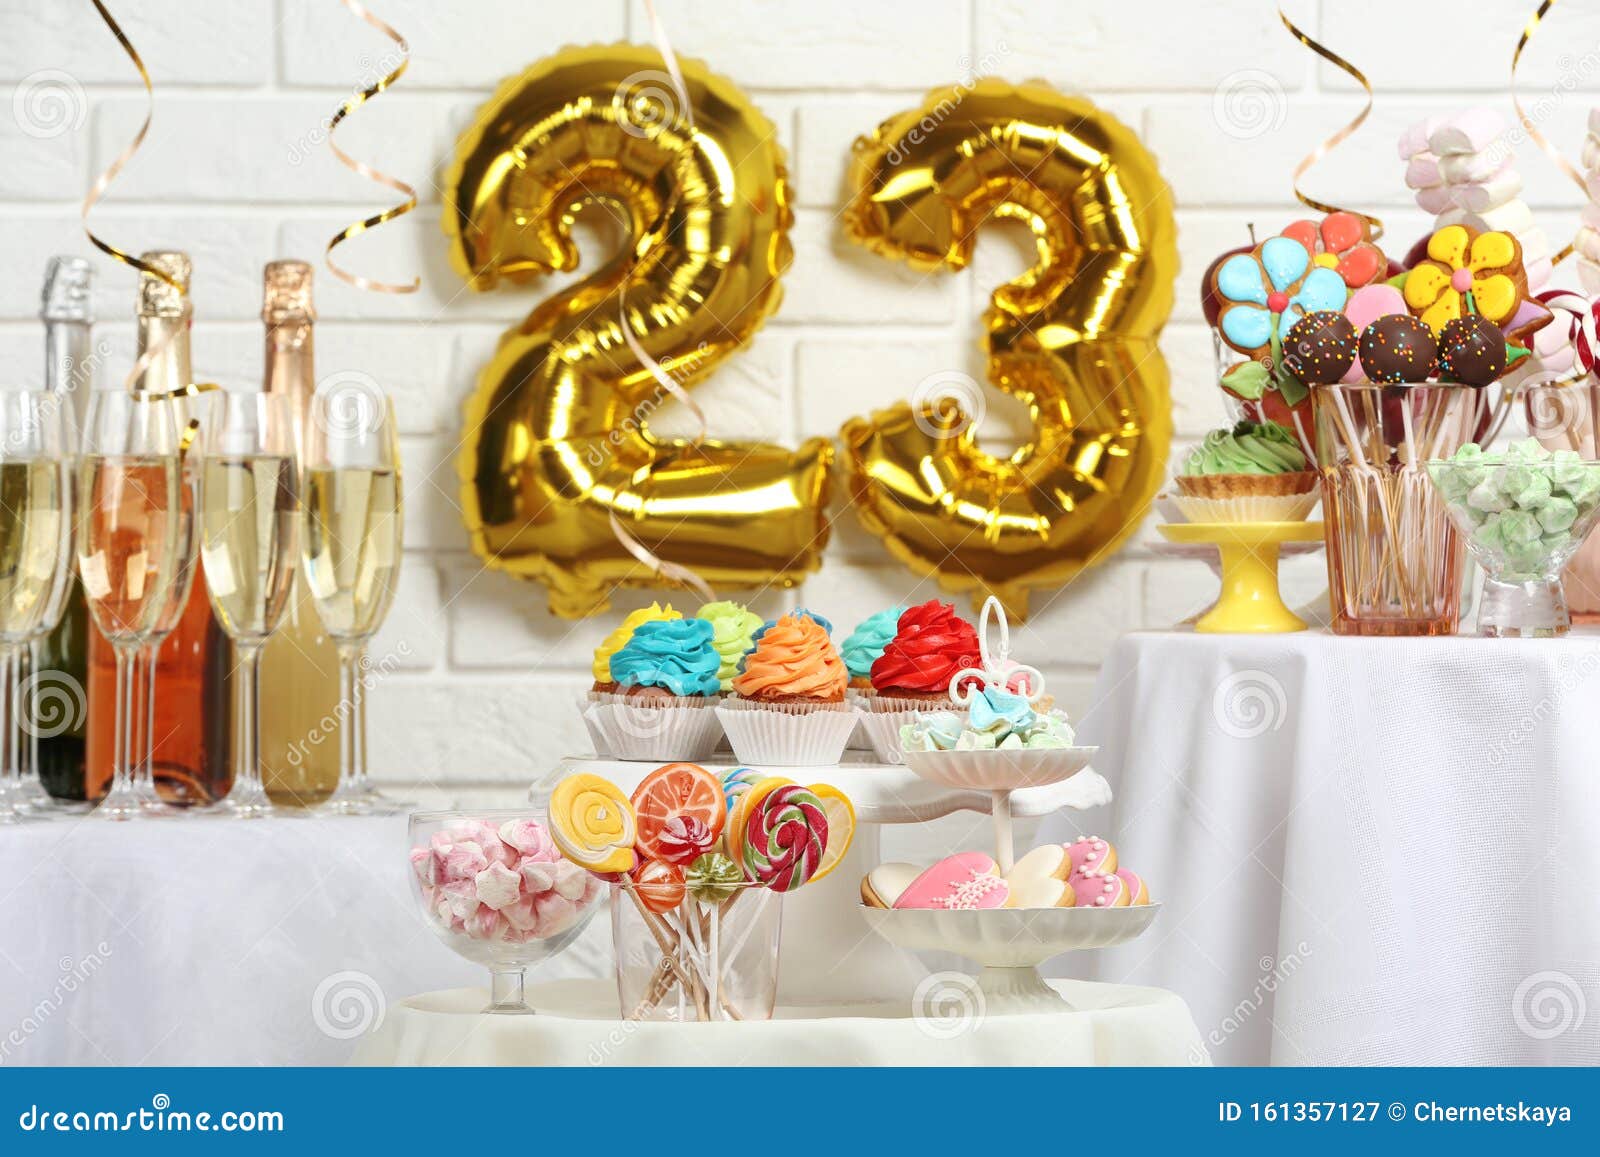 Dessert Table In Room Decorated With Balloons For 23 Year Birthday Party Stock Image Image Of Helium Confectionery